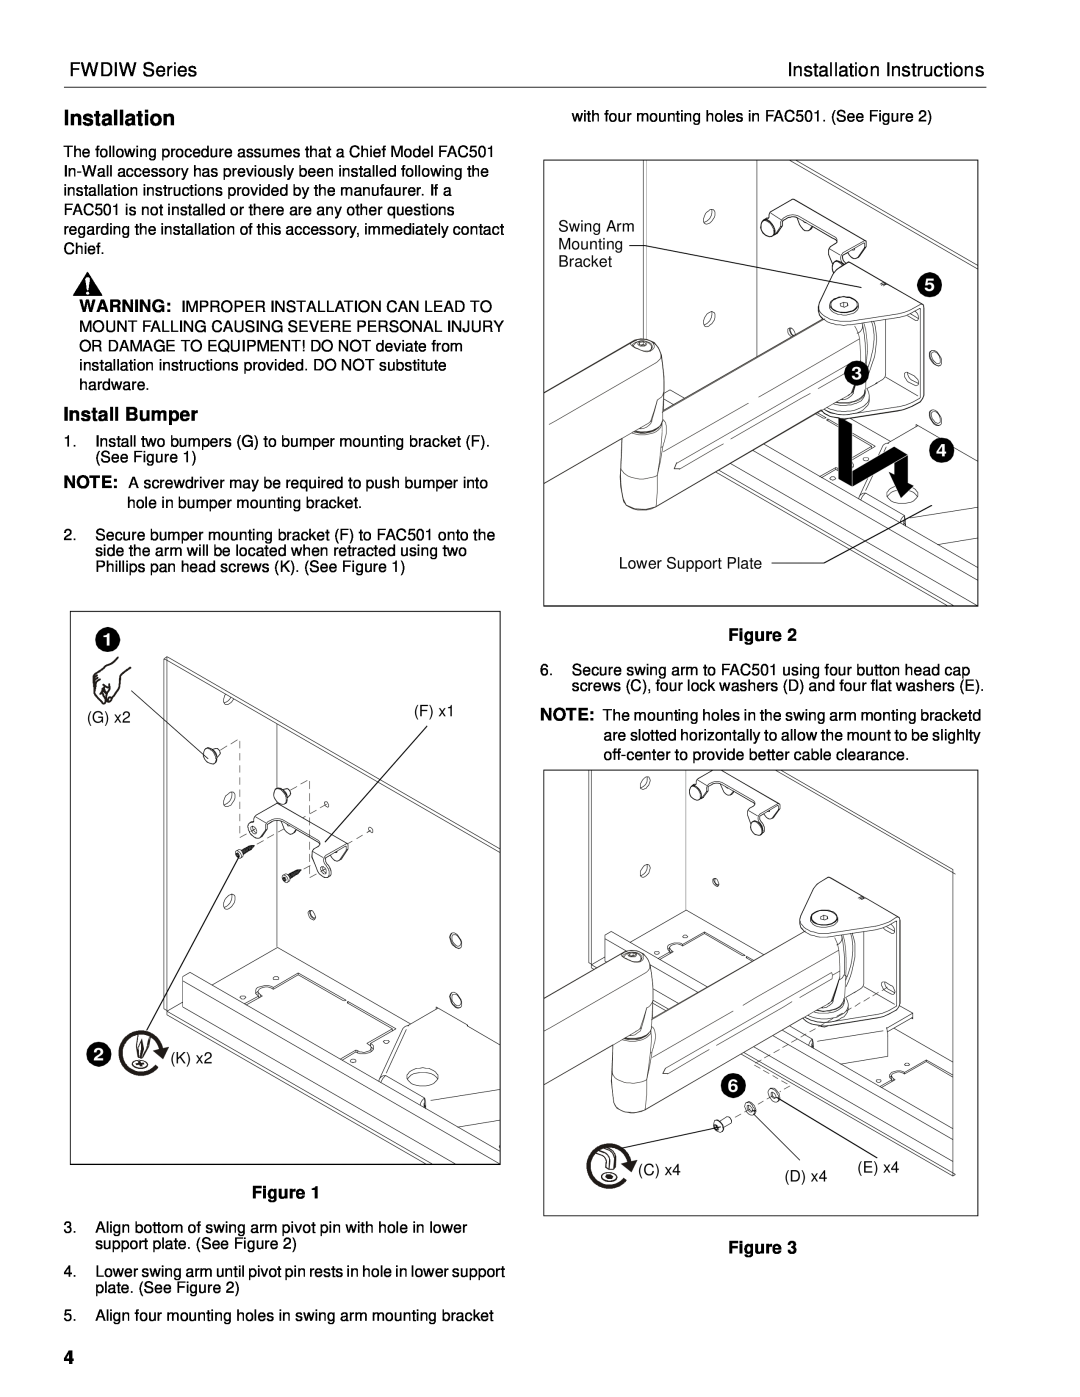 Chief Manufacturing FWDIW-I Series installation instructions Install Bumper, FWDIW Series, Installation Instructions 